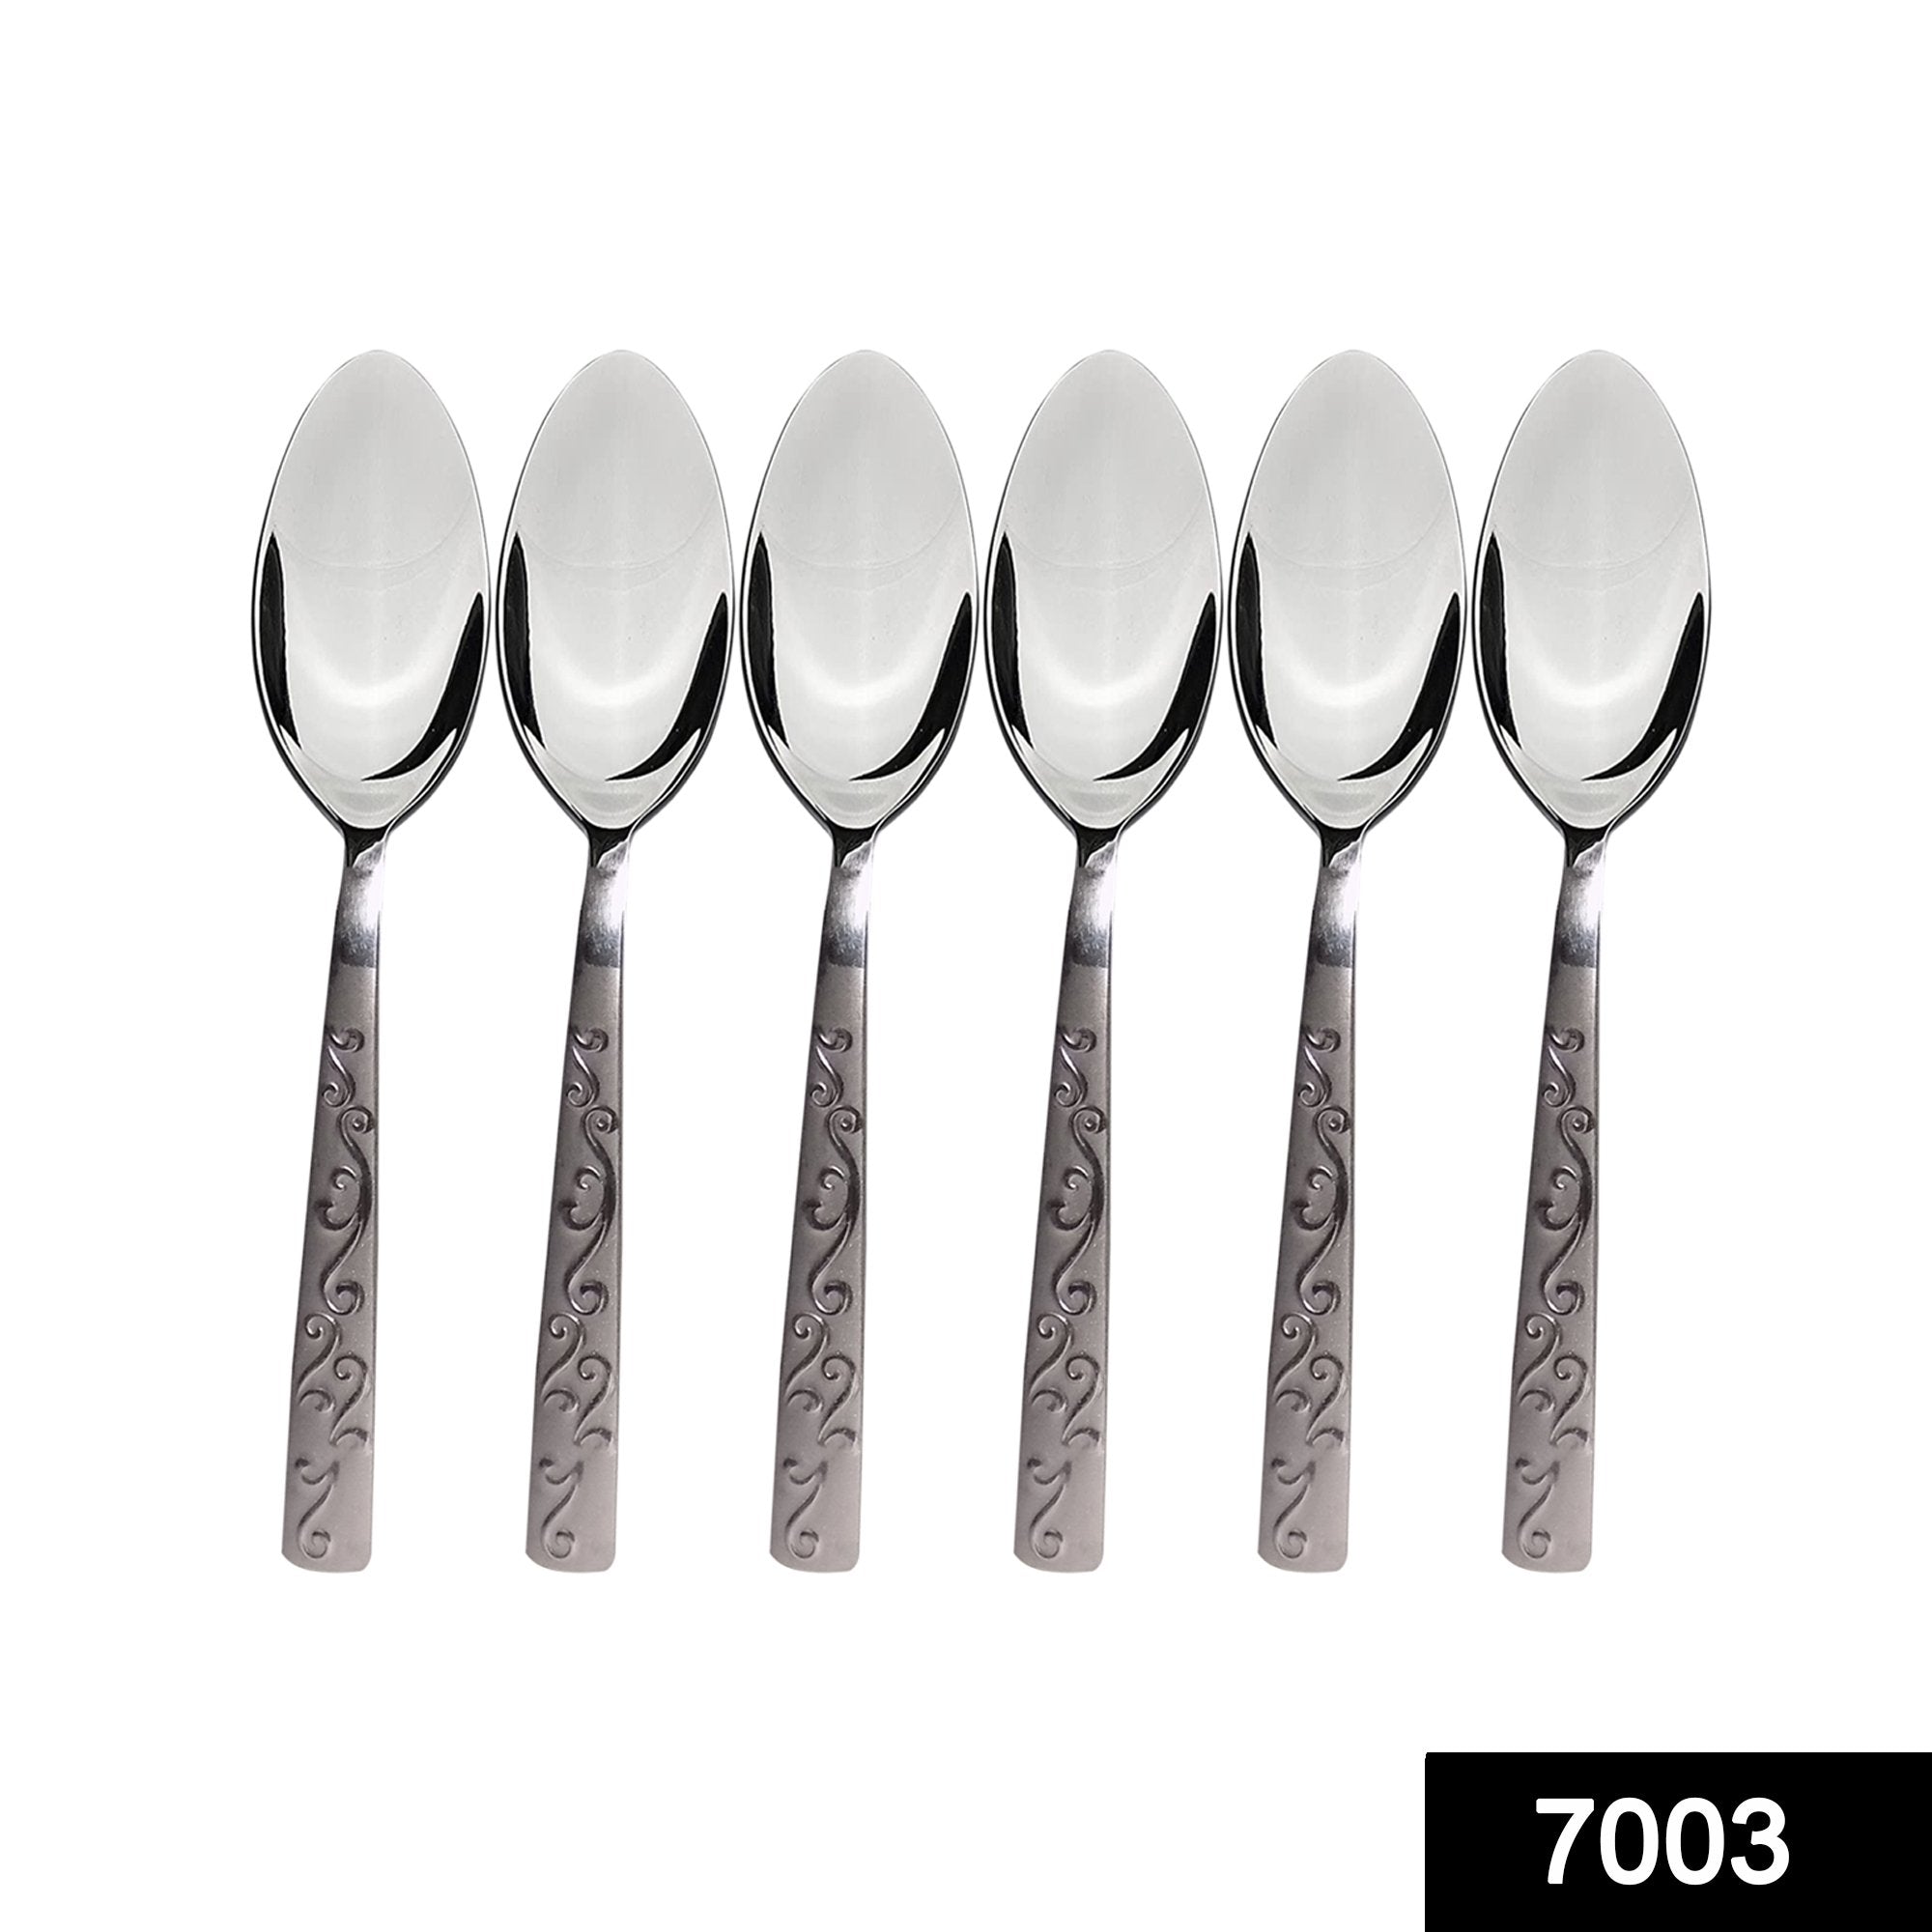 7003 Stainless Steel Small Spoon for Home/Kitchen (Set of 6) - SkyShopy